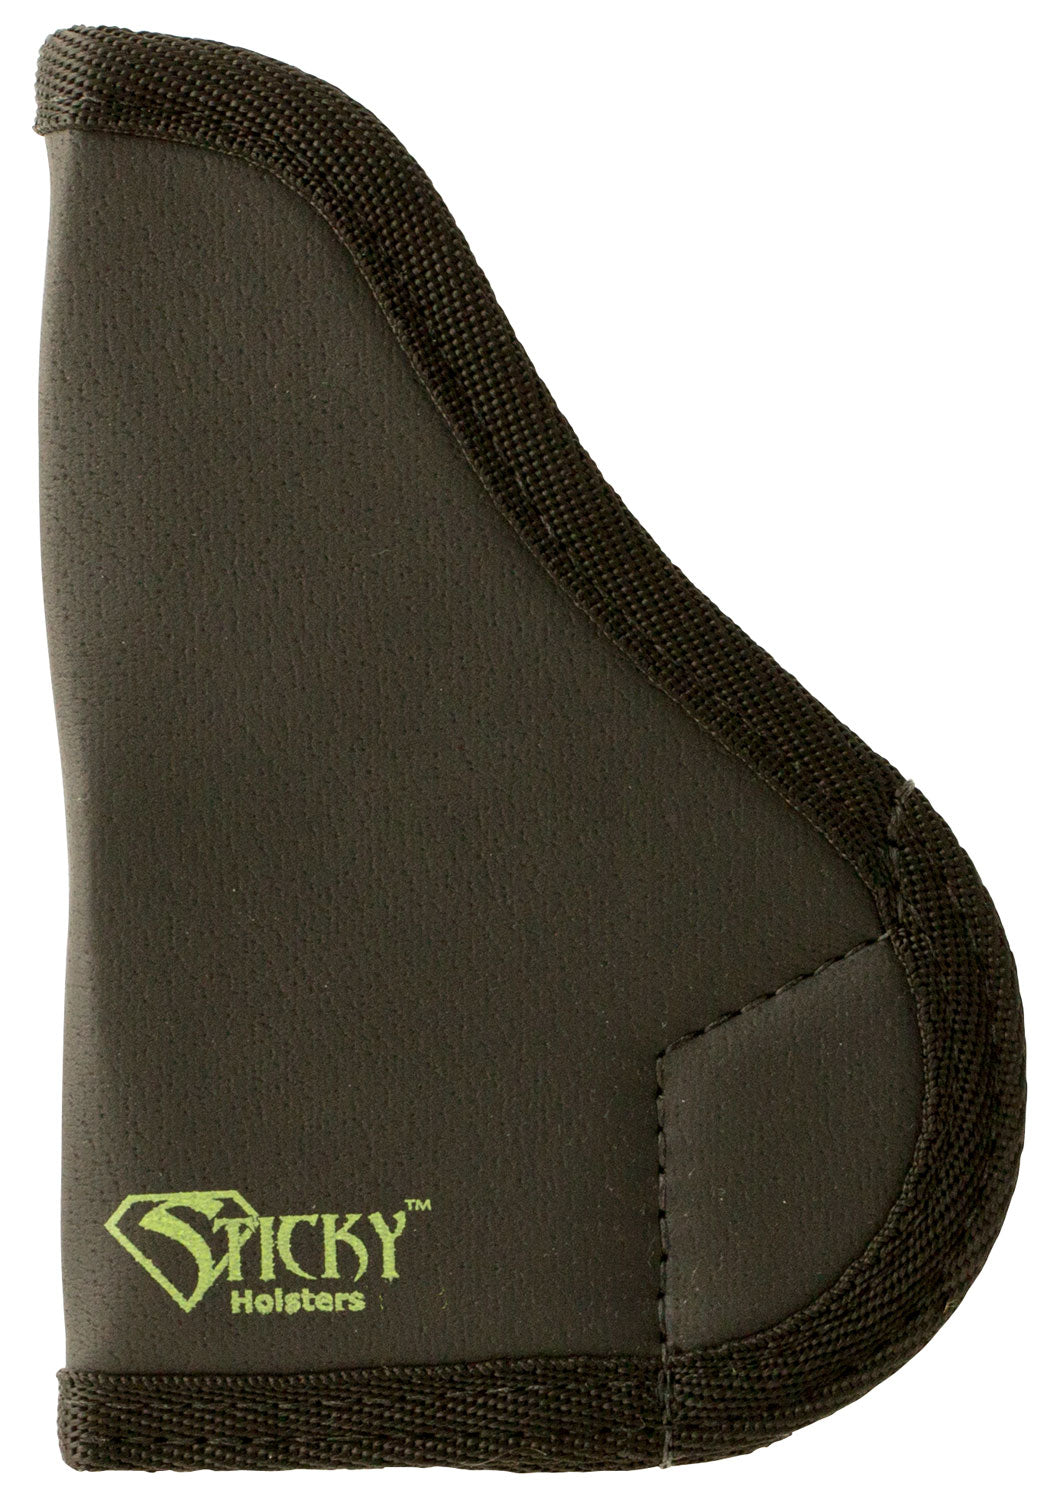 Sticky Holsters SM2 SM-2 Walther PKT 380 Latex Free Synthetic Rubber Black w/Green Logo